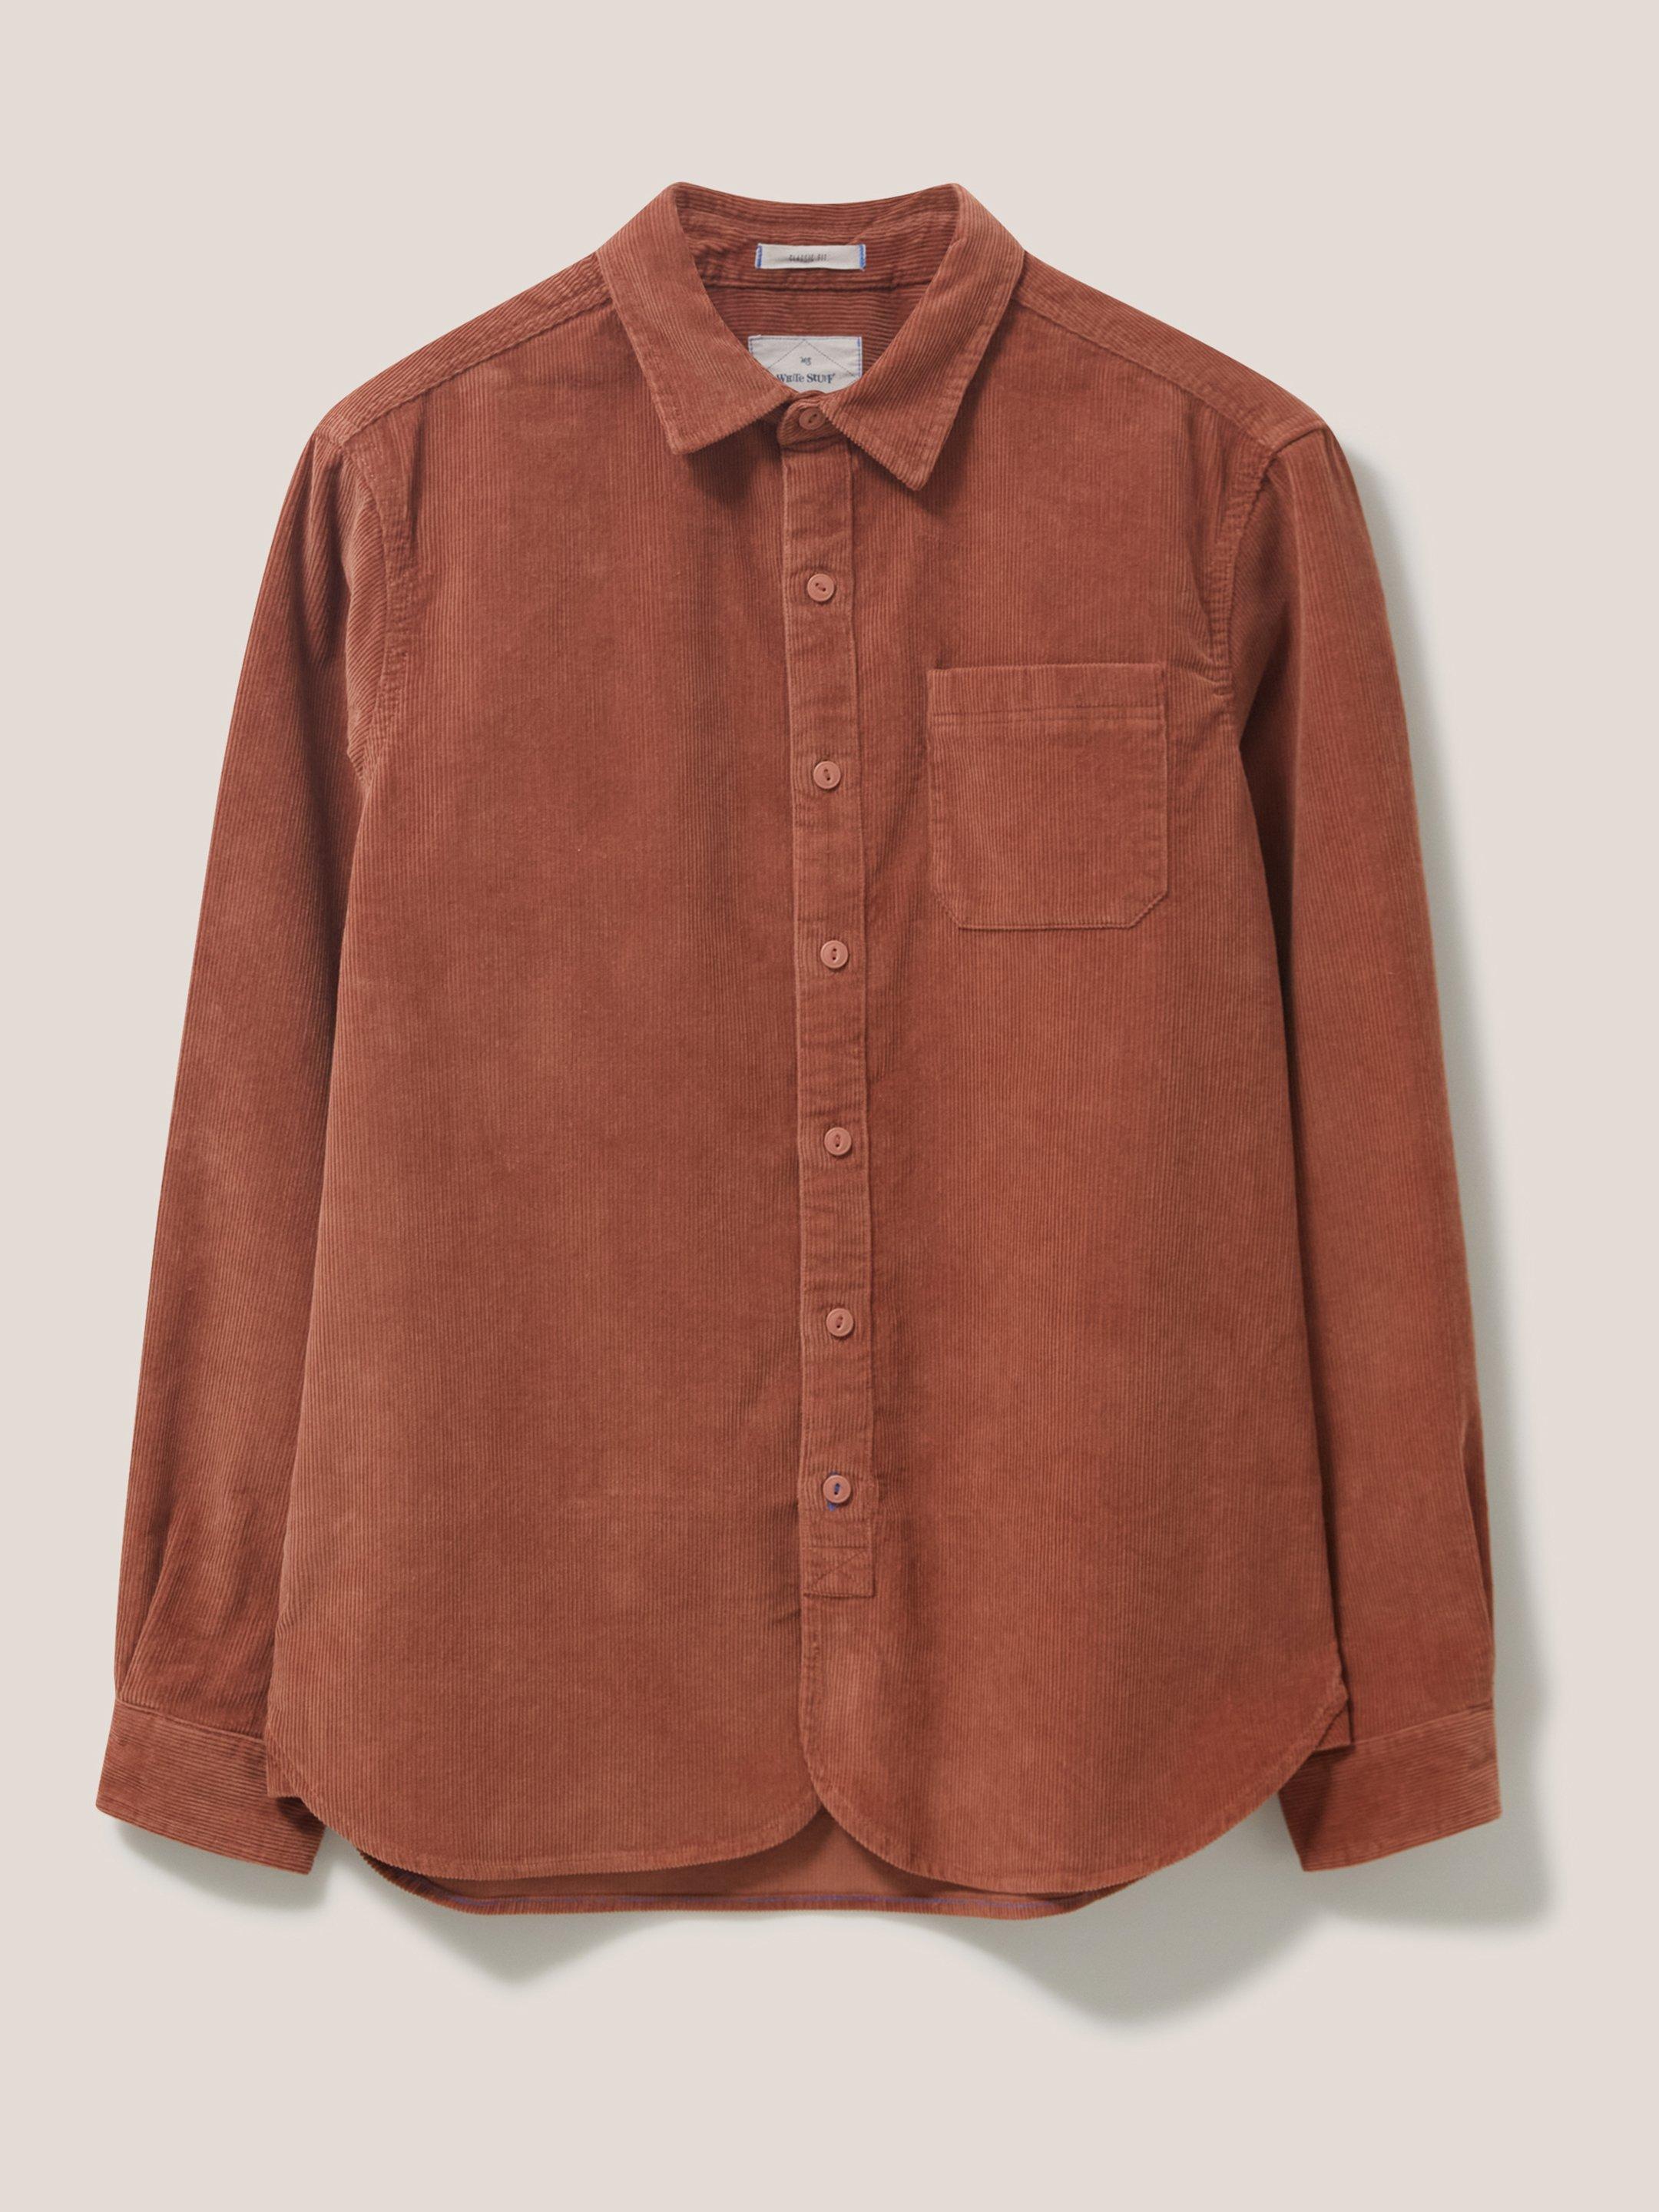 Whitwick Cord Shirt in DEEP BROWN - FLAT FRONT